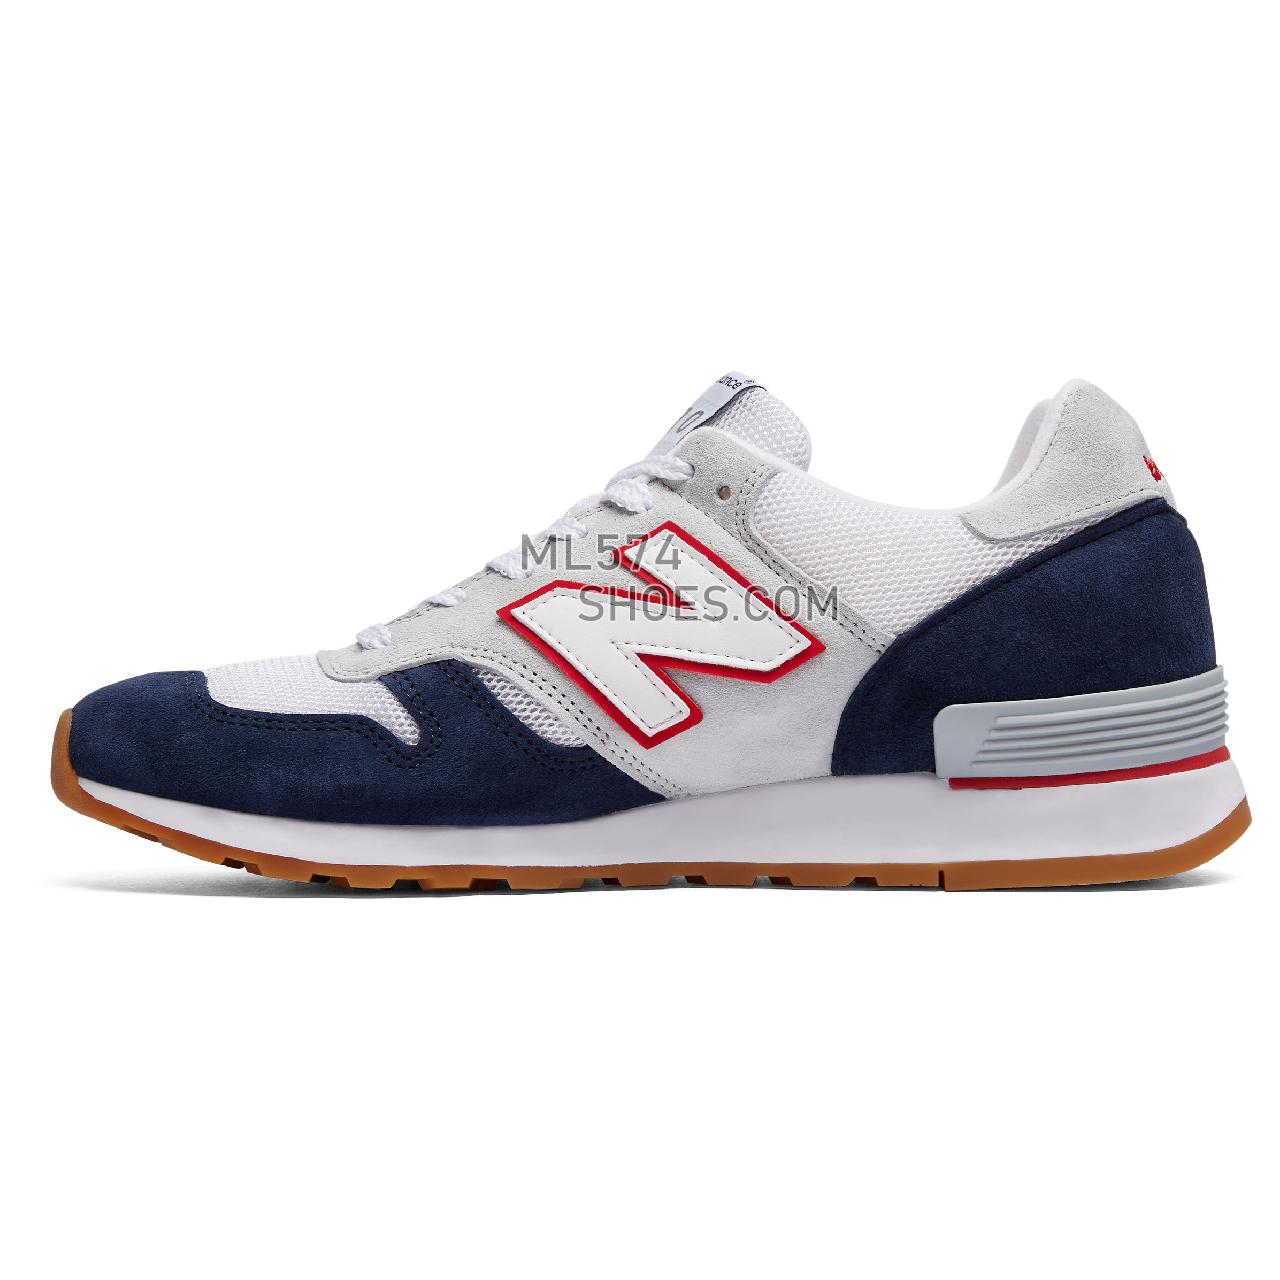 New Balance Made in UK 670 - Men's Made in USA And UK Sneakers - Grey with Blue and White - M670GNW